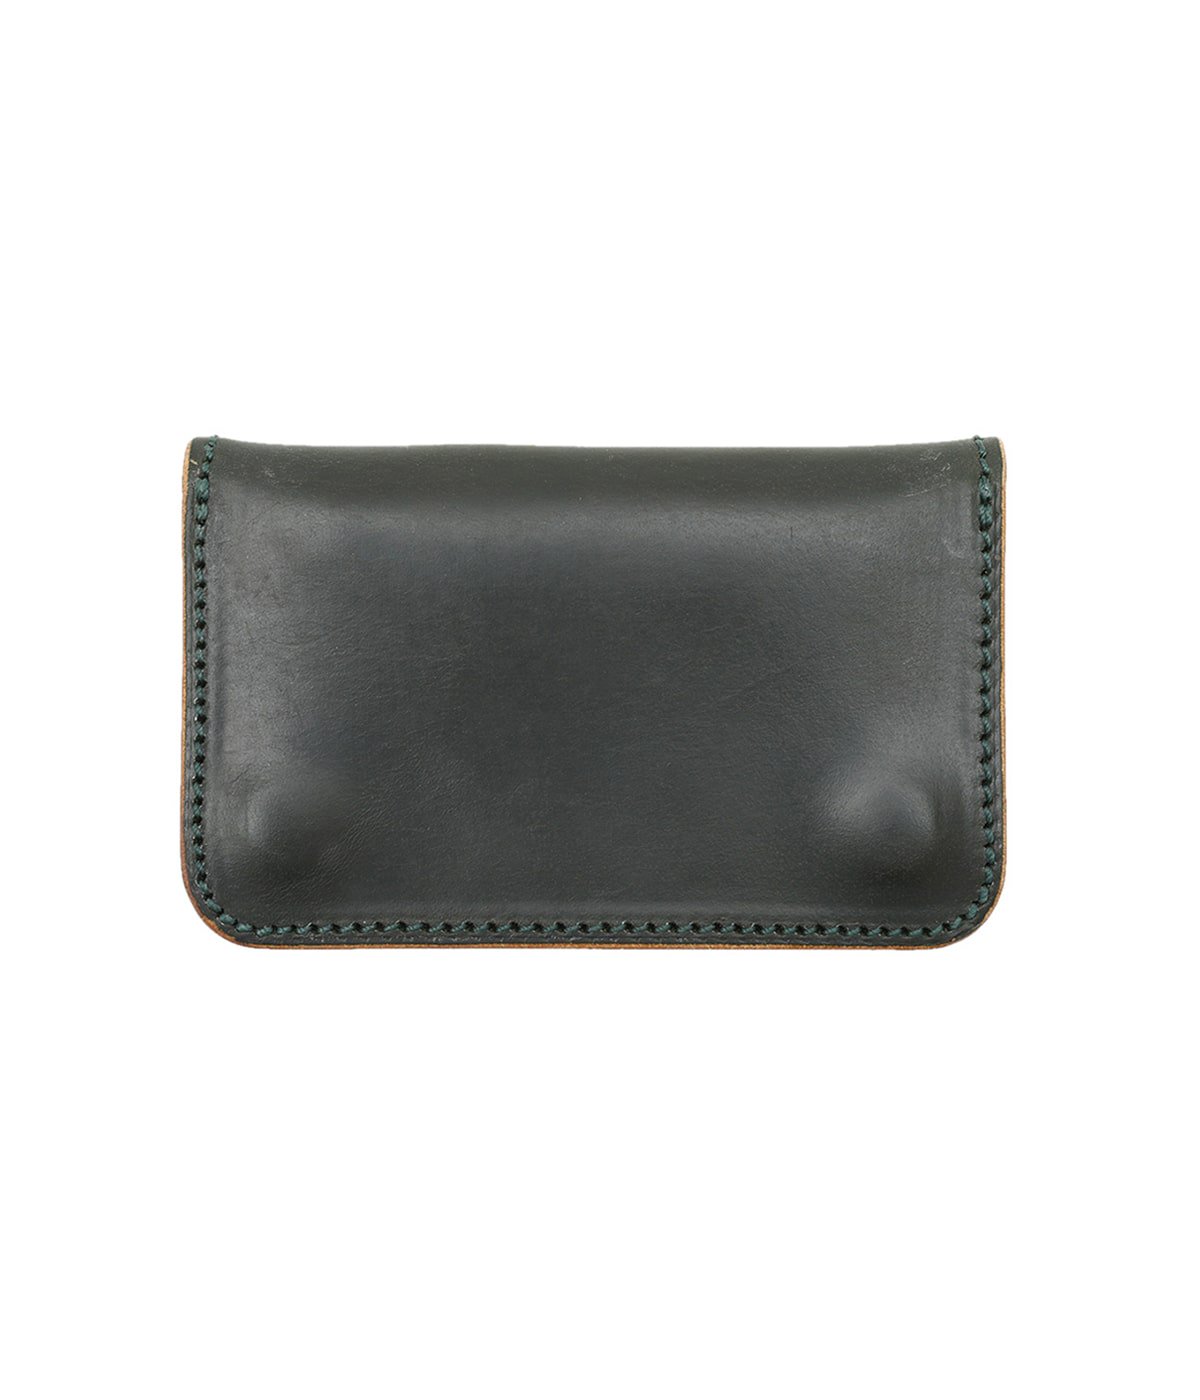 LIMITED TRUCKERS WALLET SMALL | LARRY SMITH(ラリースミス